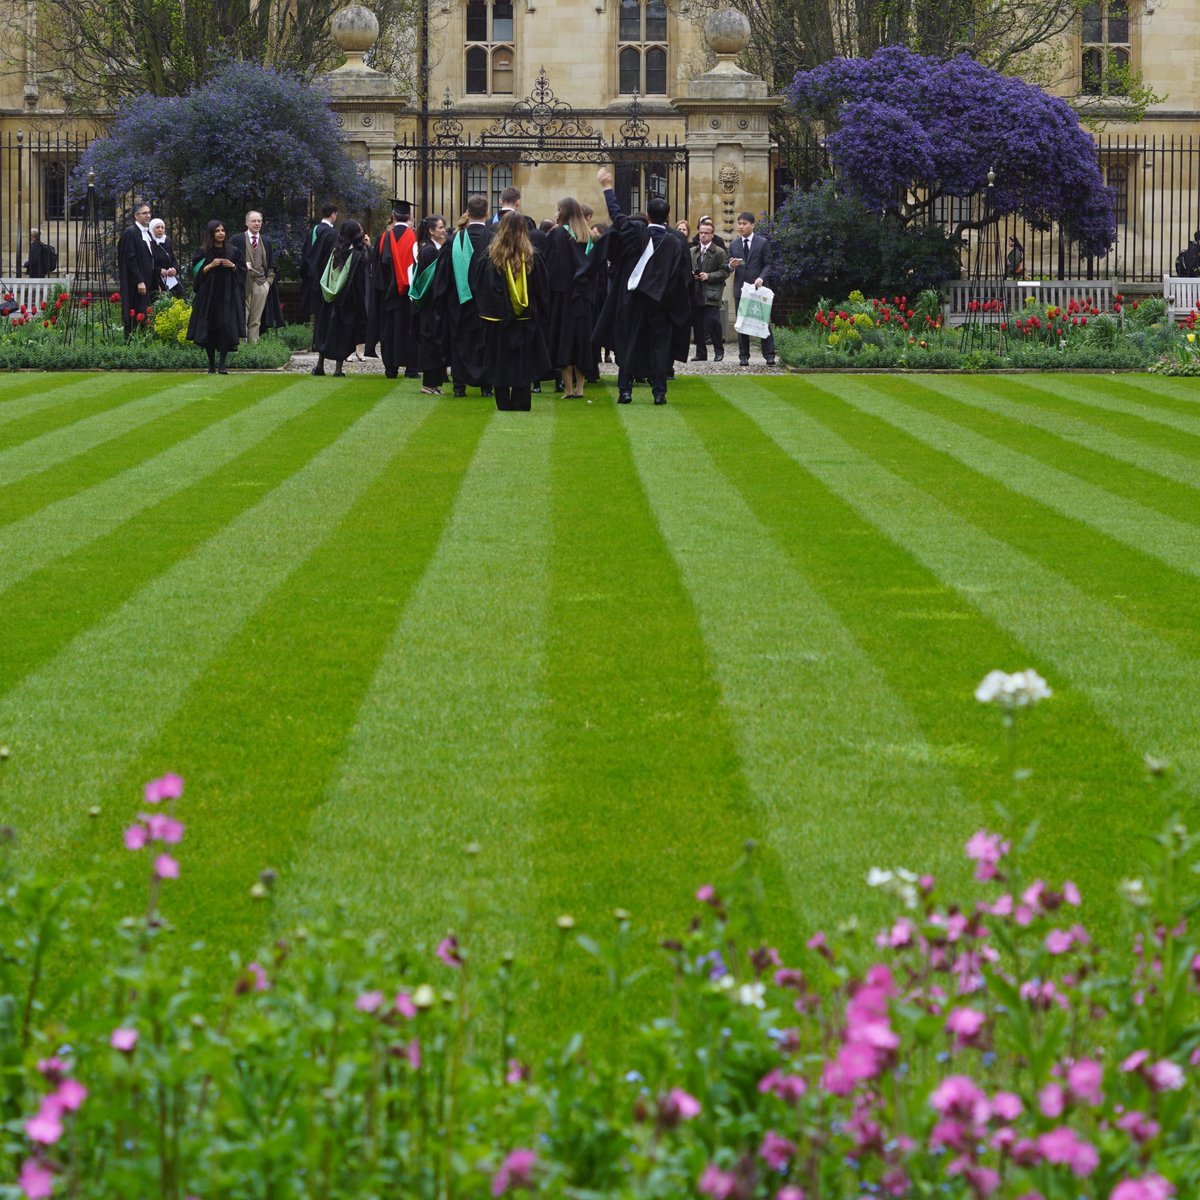 Grey skies but brighter smiles were the order of the day for last weekend's graduation procession to Senate House. Congratulations to everyone on their new degrees! The full album of photos is on our Facebook page: facebook.com/media/set/?van… #CambridgeAlumni